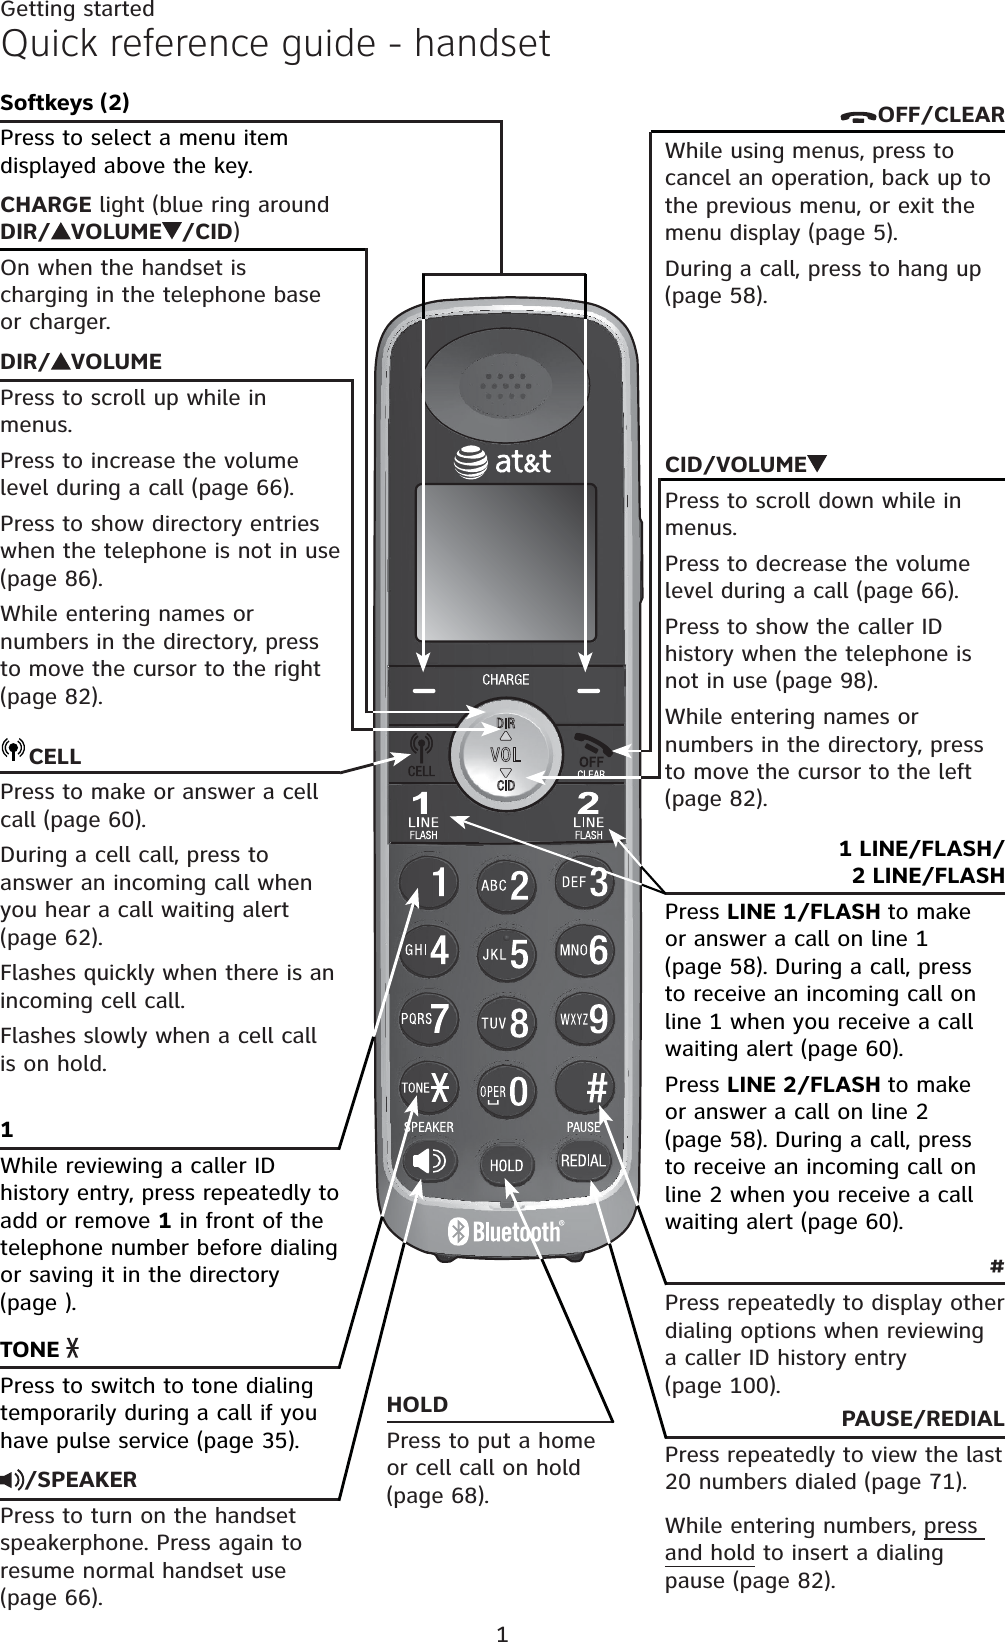 1Getting startedQuick reference guide - handsetCHARGE light (blue ring around DIR/ VOLUME /CID)On when the handset is charging in the telephone base or charger.DIR/ VOLUMEPress to scroll up while in menus.Press to increase the volume level during a call (page 66).Press to show directory entries when the telephone is not in use (page 86).While entering names or numbers in the directory, press to move the cursor to the right (page 82).CID/VOLUMEPress to scroll down while in menus.Press to decrease the volume level during a call (page 66).Press to show the caller ID history when the telephone is not in use (page 98).While entering names or numbers in the directory, press to move the cursor to the left (page 82).TONE Press to switch to tone dialing temporarily during a call if you have pulse service (page 35).CELLPress to make or answer a cell call (page 60).During a cell call, press to answer an incoming call when you hear a call waiting alert (page 62).Flashes quickly when there is an incoming cell call.Flashes slowly when a cell call is on hold.1 LINE/FLASH/2 LINE/FLASHPress LINE 1/FLASH to make or answer a call on line 1 (page 58). During a call, press to receive an incoming call on line 1 when you receive a call waiting alert (page 60).Press LINE 2/FLASH to make or answer a call on line 2 (page 58). During a call, press to receive an incoming call on line 2 when you receive a call waiting alert (page 60).1While reviewing a caller ID history entry, press repeatedly to add or remove 1 in front of the telephone number before dialing or saving it in the directory (page ).OFF/CLEARWhile using menus, press to cancel an operation, back up to the previous menu, or exit the menu display (page 5).During a call, press to hang up (page 58).PAUSE/REDIALPress repeatedly to view the last 20 numbers dialed (page 71).While entering numbers, press and hold to insert a dialing pause (page 82)./SPEAKERPress to turn on the handset speakerphone. Press again to resume normal handset use (page 66).HOLDPress to put a home or cell call on hold (page 68).#Press repeatedly to display other dialing options when reviewing a caller ID history entry (page 100).Softkeys (2)Press to select a menu item displayed above the key.